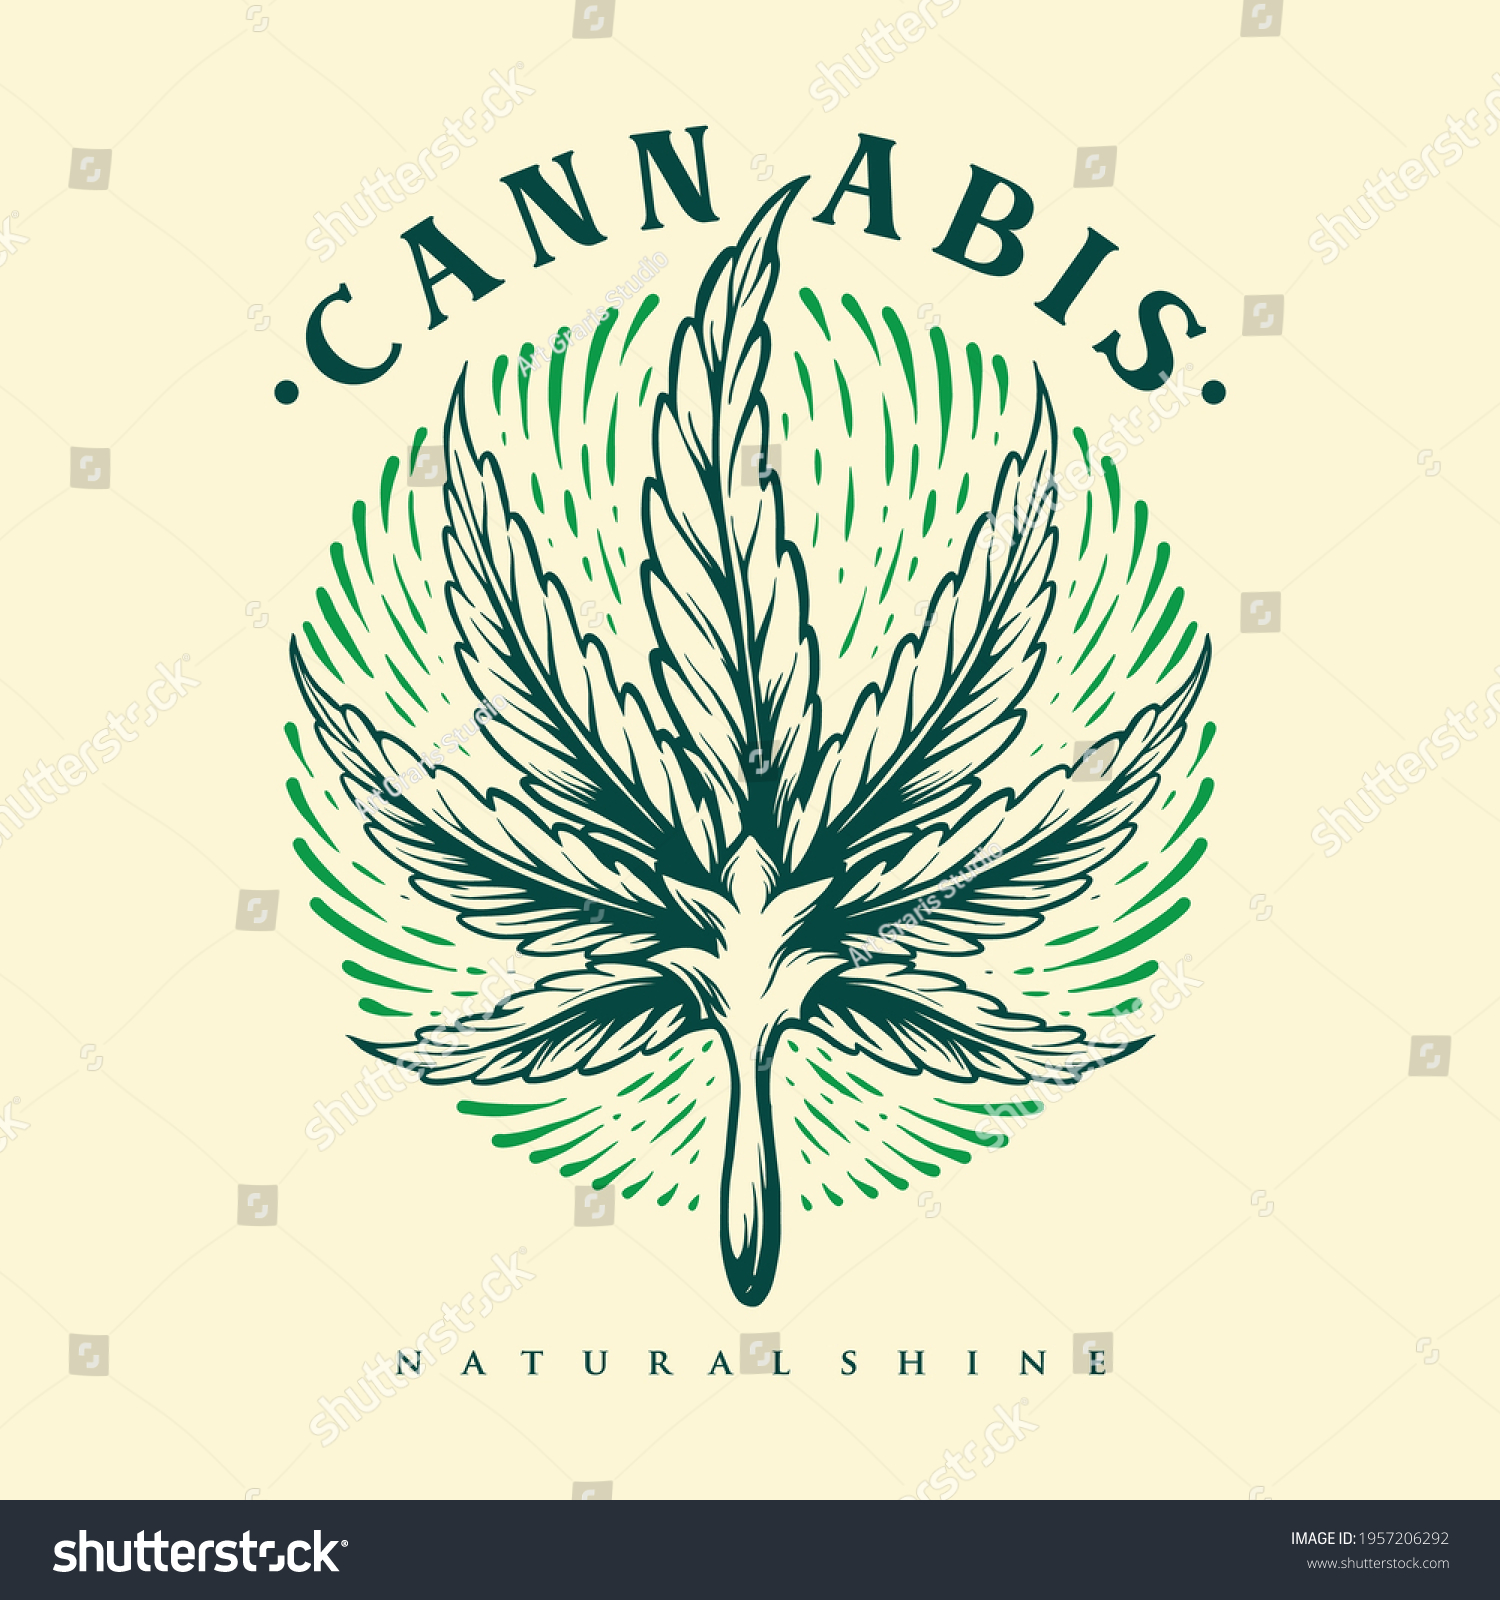 SVG of Leaf Cannabis Engraving Shine Vintage illustrations for your work Logo, mascot merchandise t-shirt, stickers and Label designs, poster, greeting cards advertising business company or brands svg